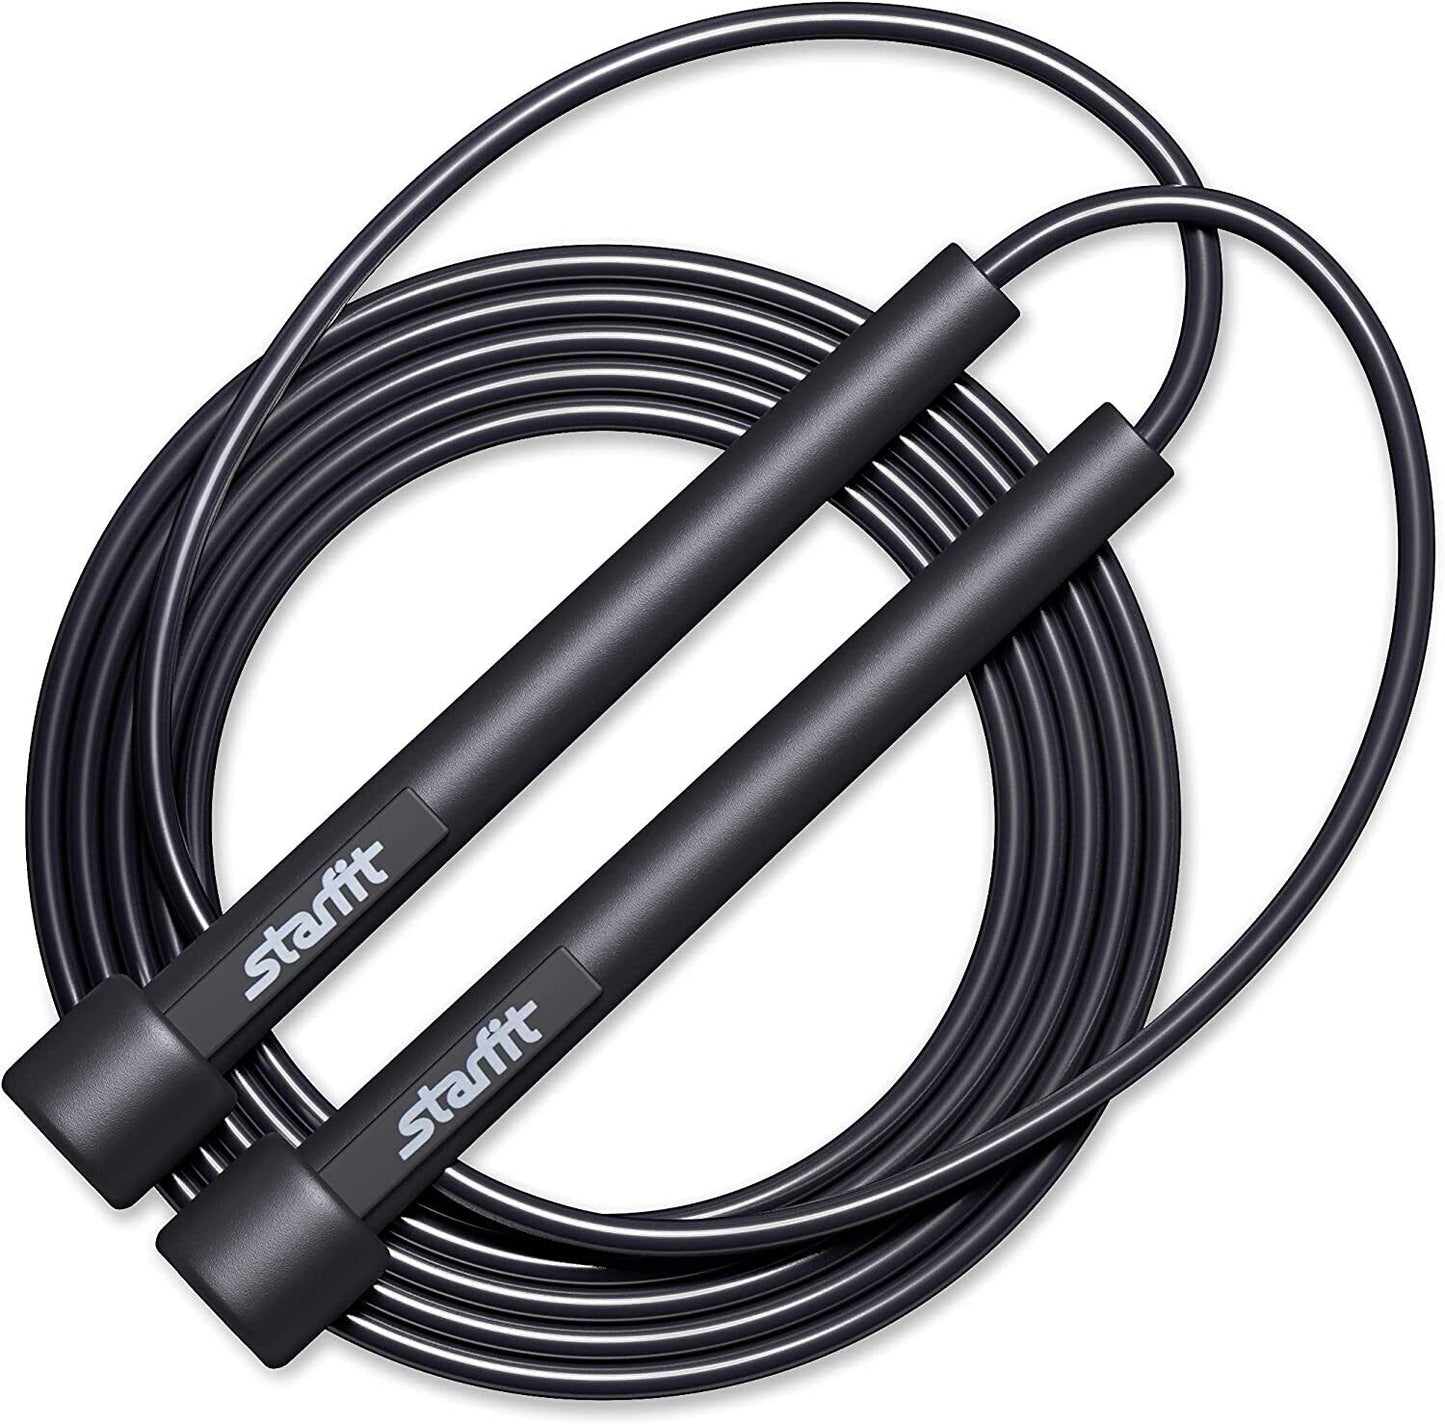 Lightweight Jump Rope Fitness Exercise Adjustable Ropes Handles Tangle-Free